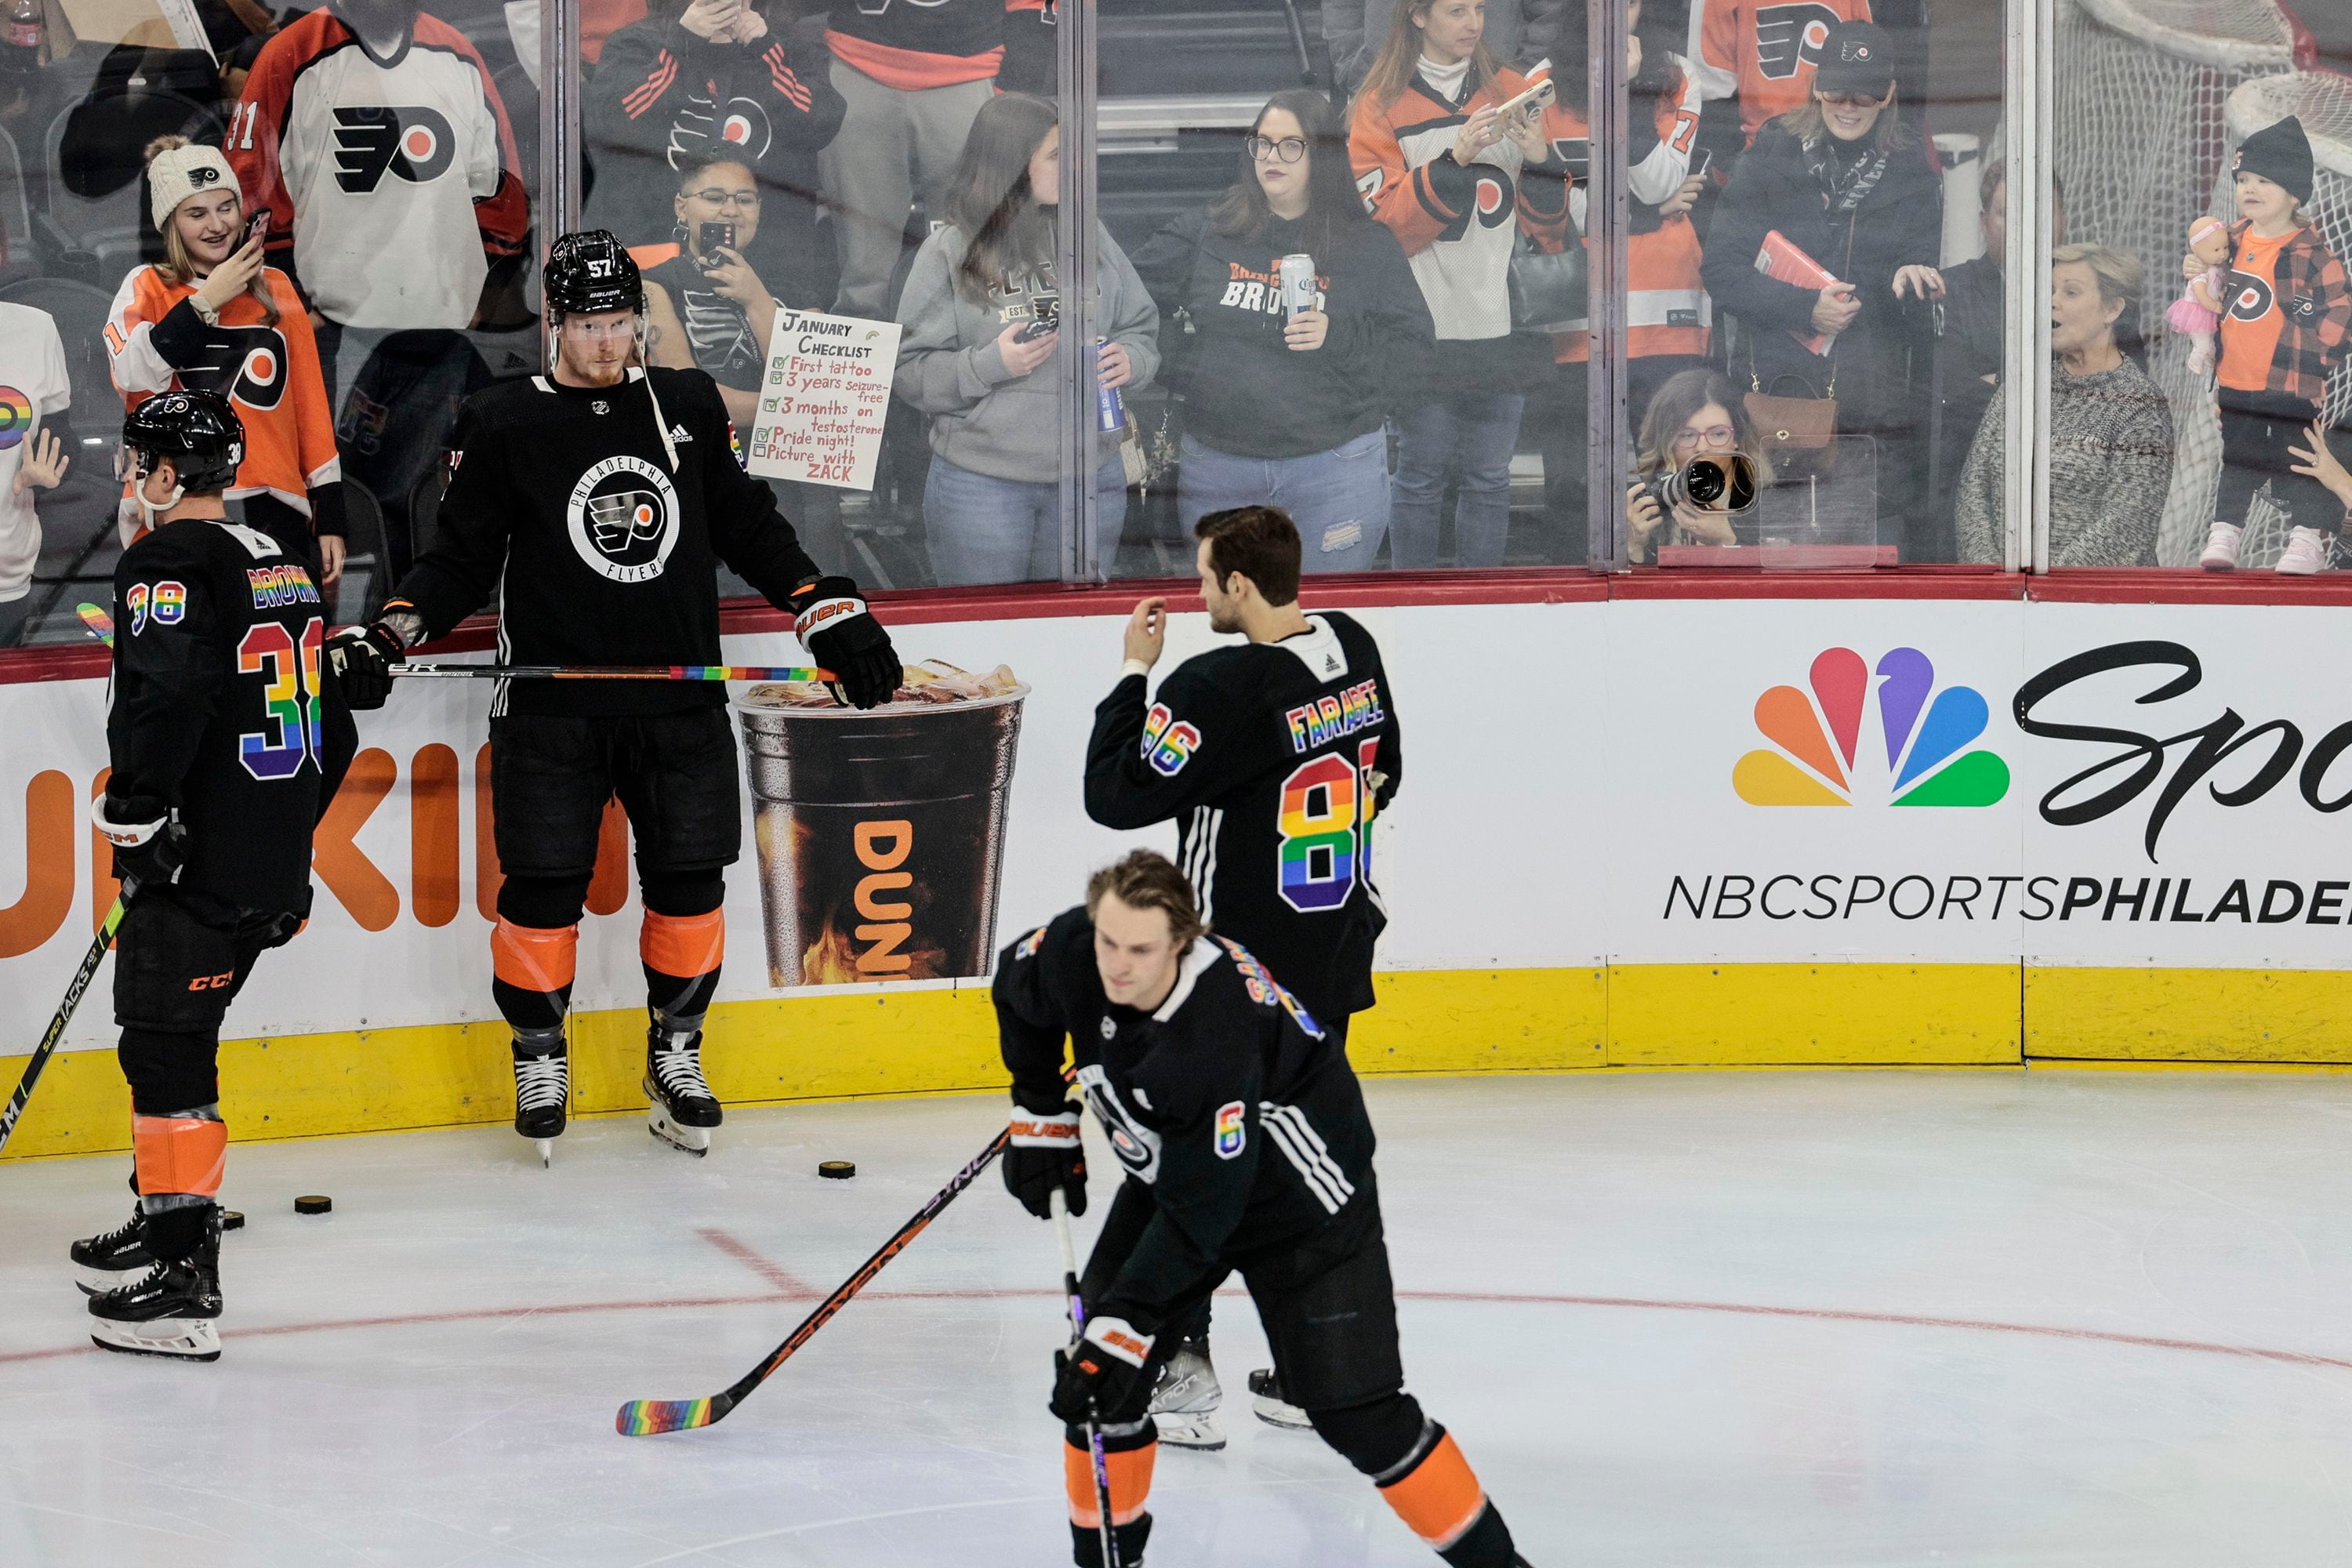 ESPN writer calls out Flyers player for wearing jersey to support military  but skipping LGBTQ sweater